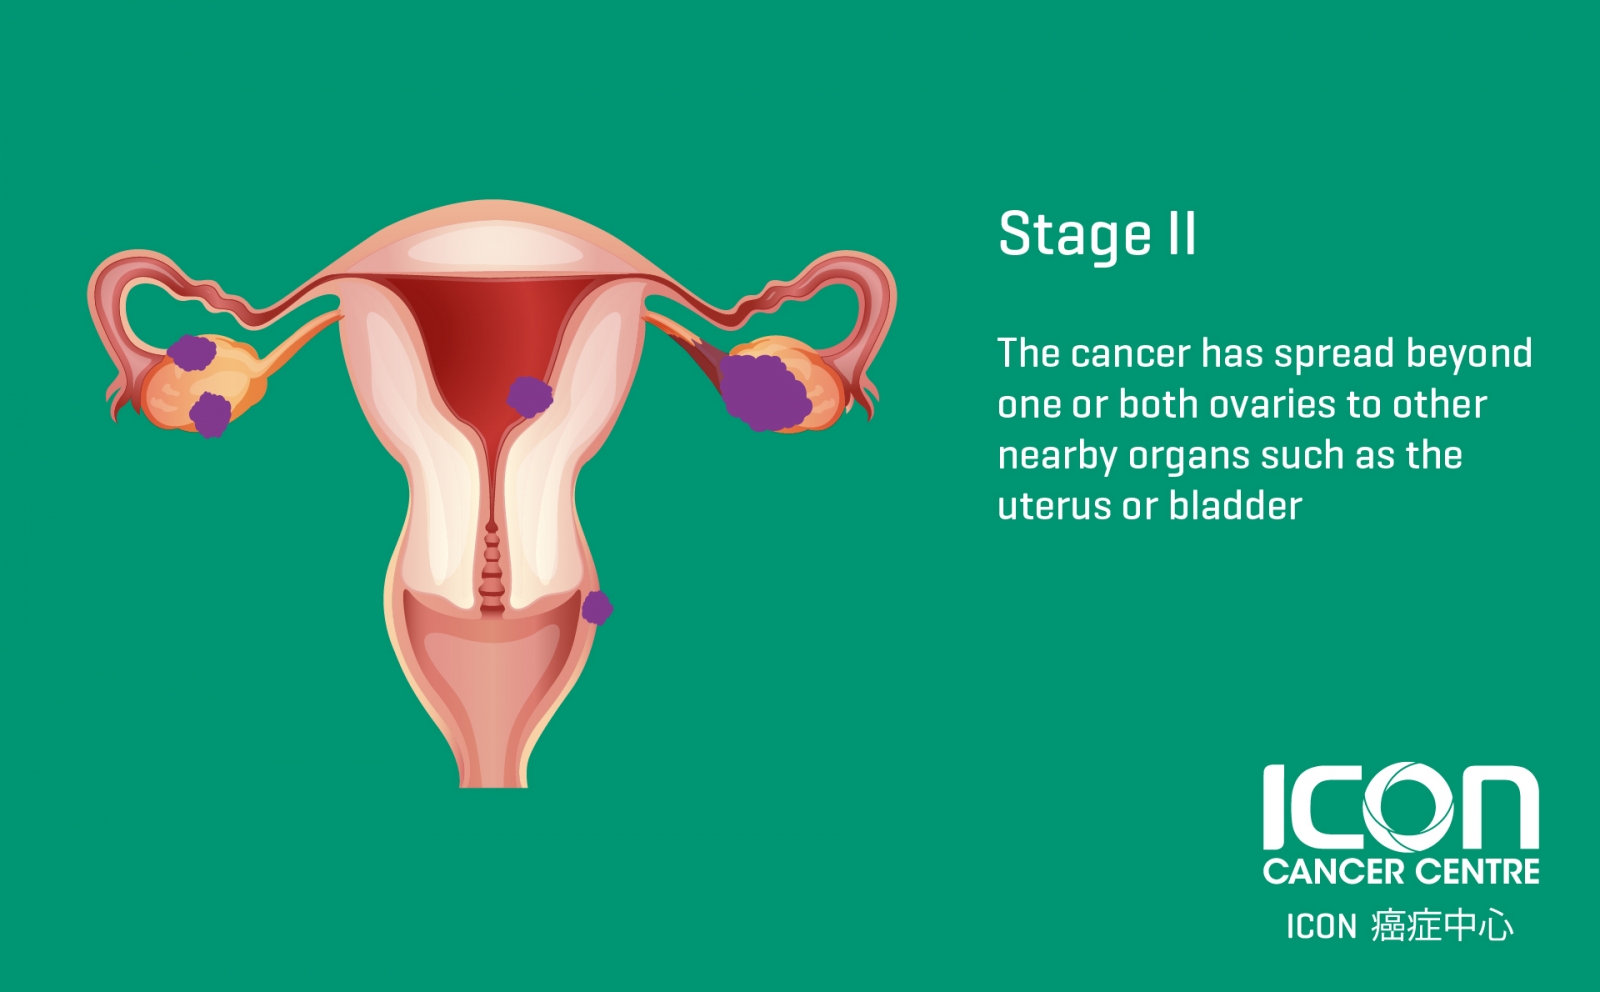 download ovarian cancer diagnosis